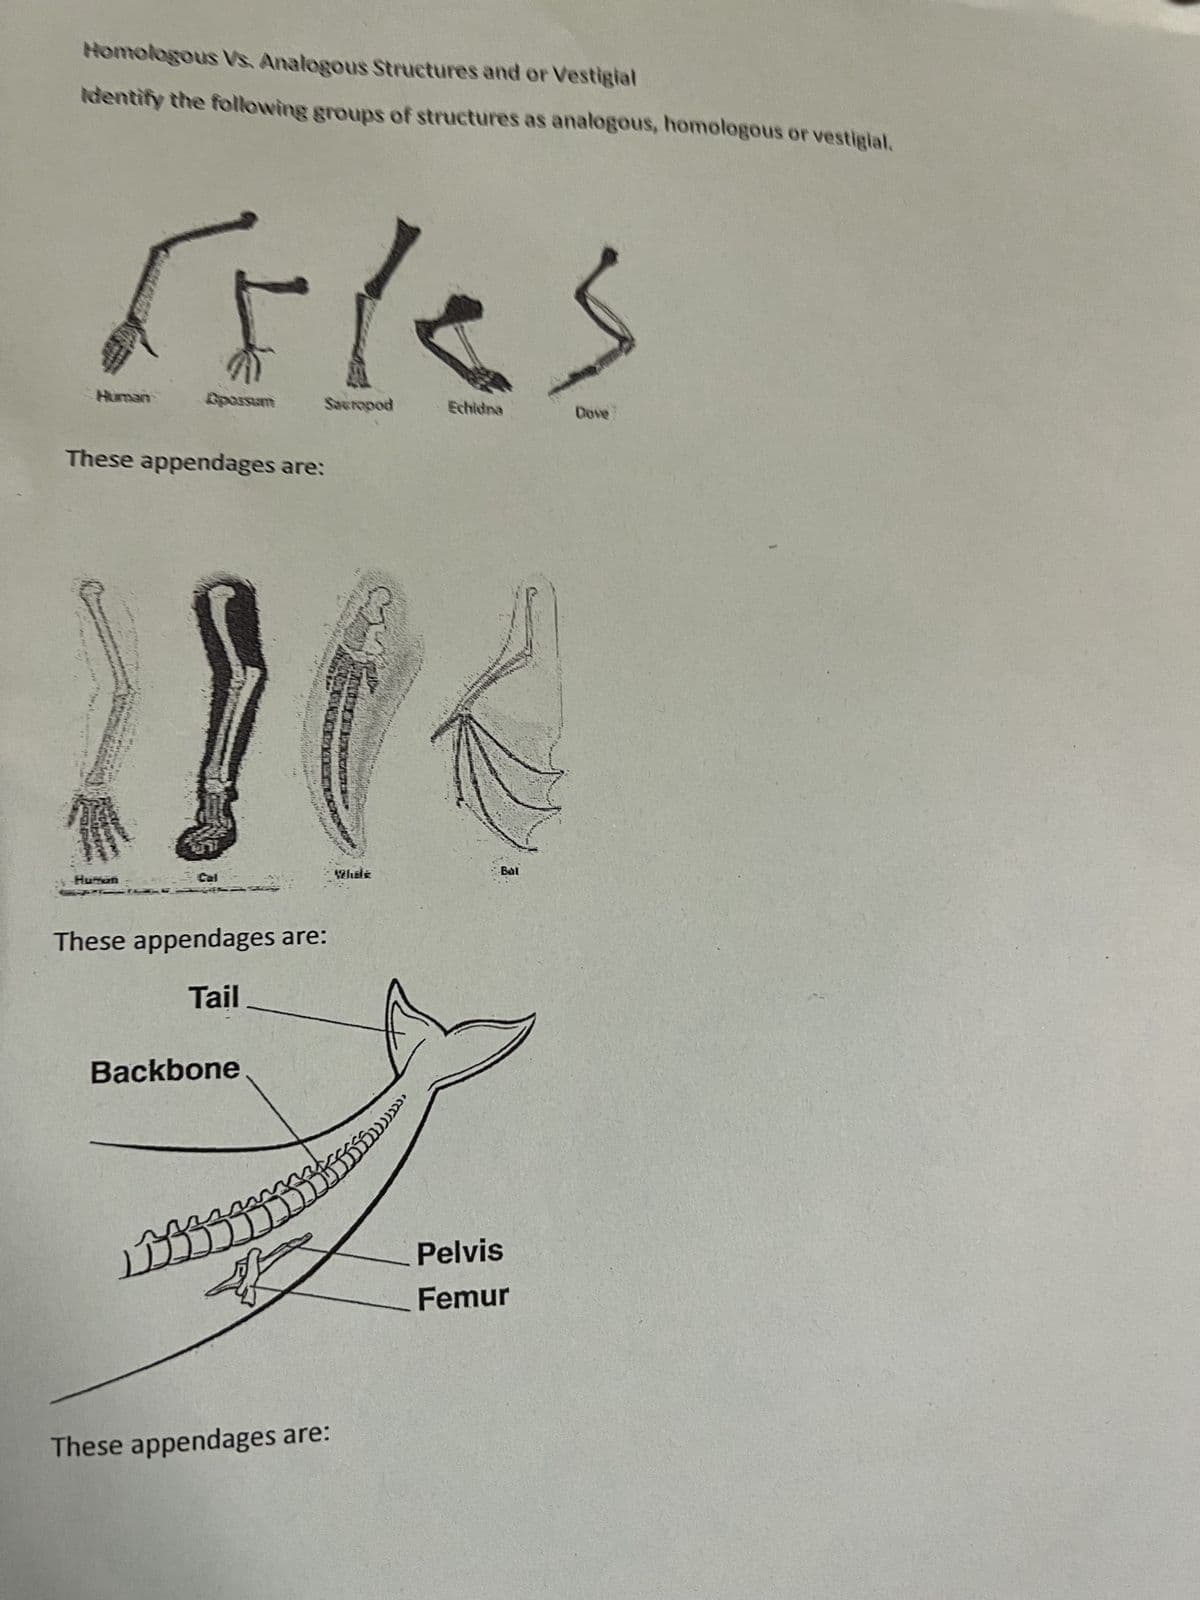 Homologous Vs. Analogous Structures and or Vestigial
Identify the following groups of structures as analogous, homologous or vestigial.
Tiles
Sacropod
Human
Gpossum
These appendages are:
Human
Cal
These appendages are:
Tail
Backbone.
ㅁㅁ
These appendages are:
TERA
C1
While
)))))),
Echidna
Bal
Pelvis
Femur
Dove